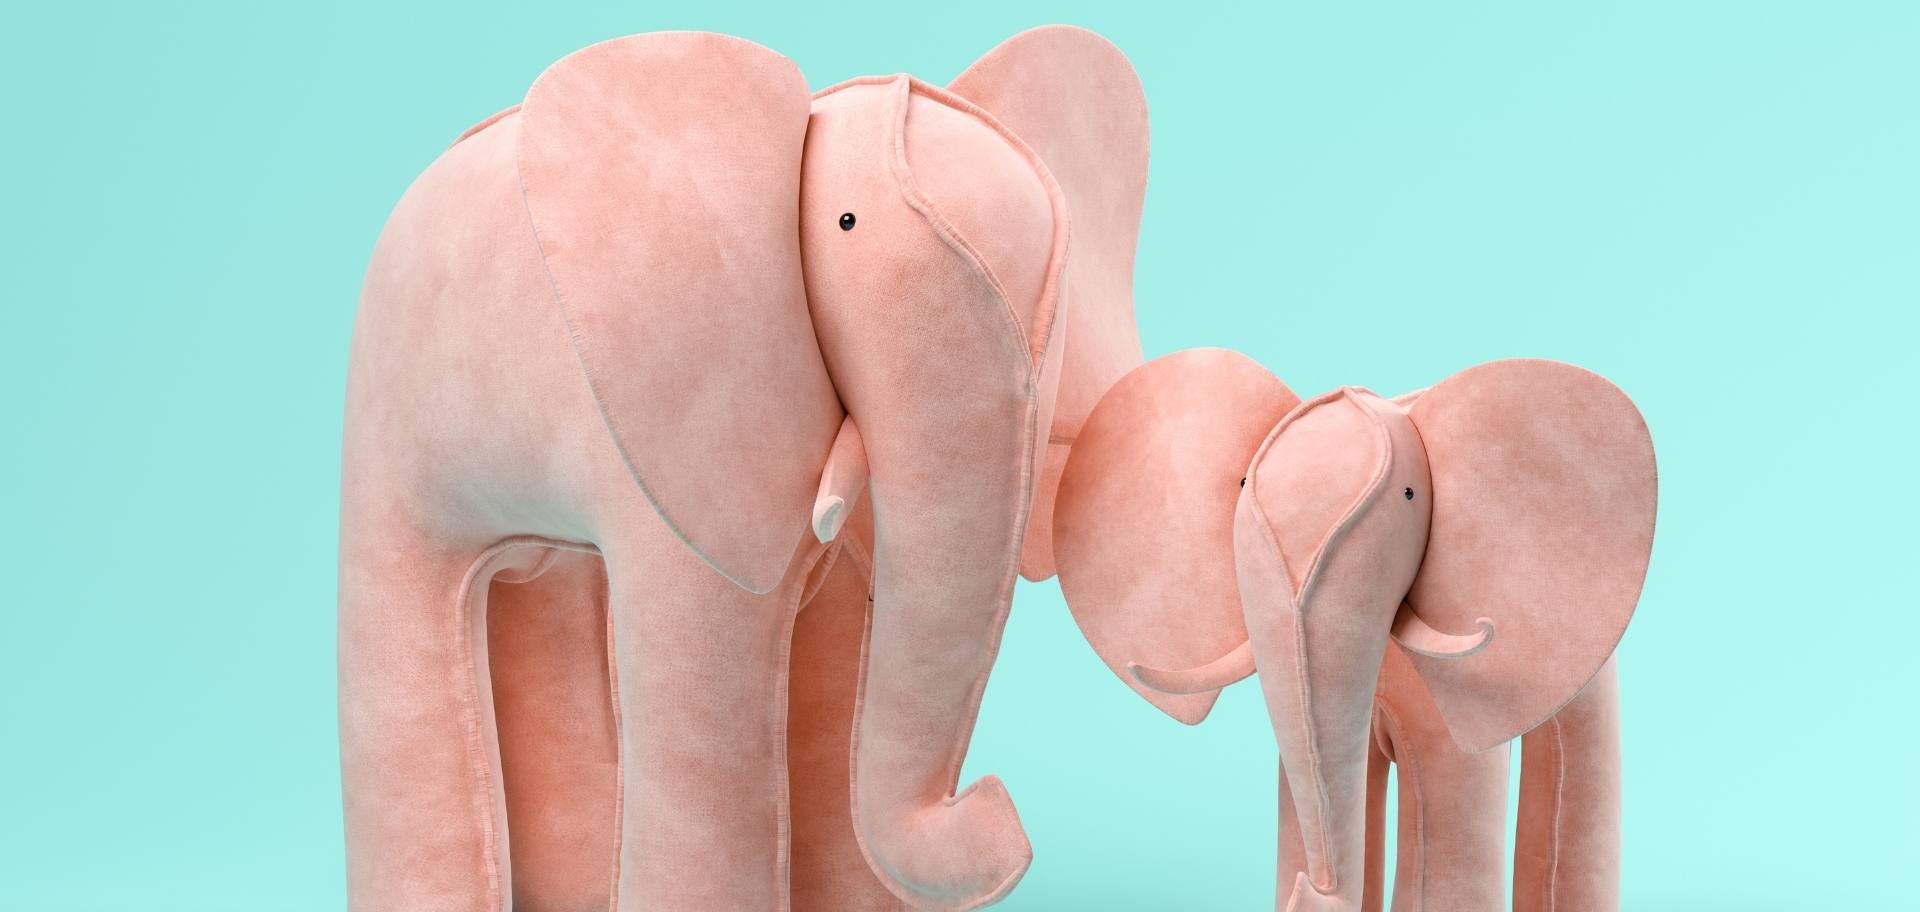 Messmart’s pink elephant in the room